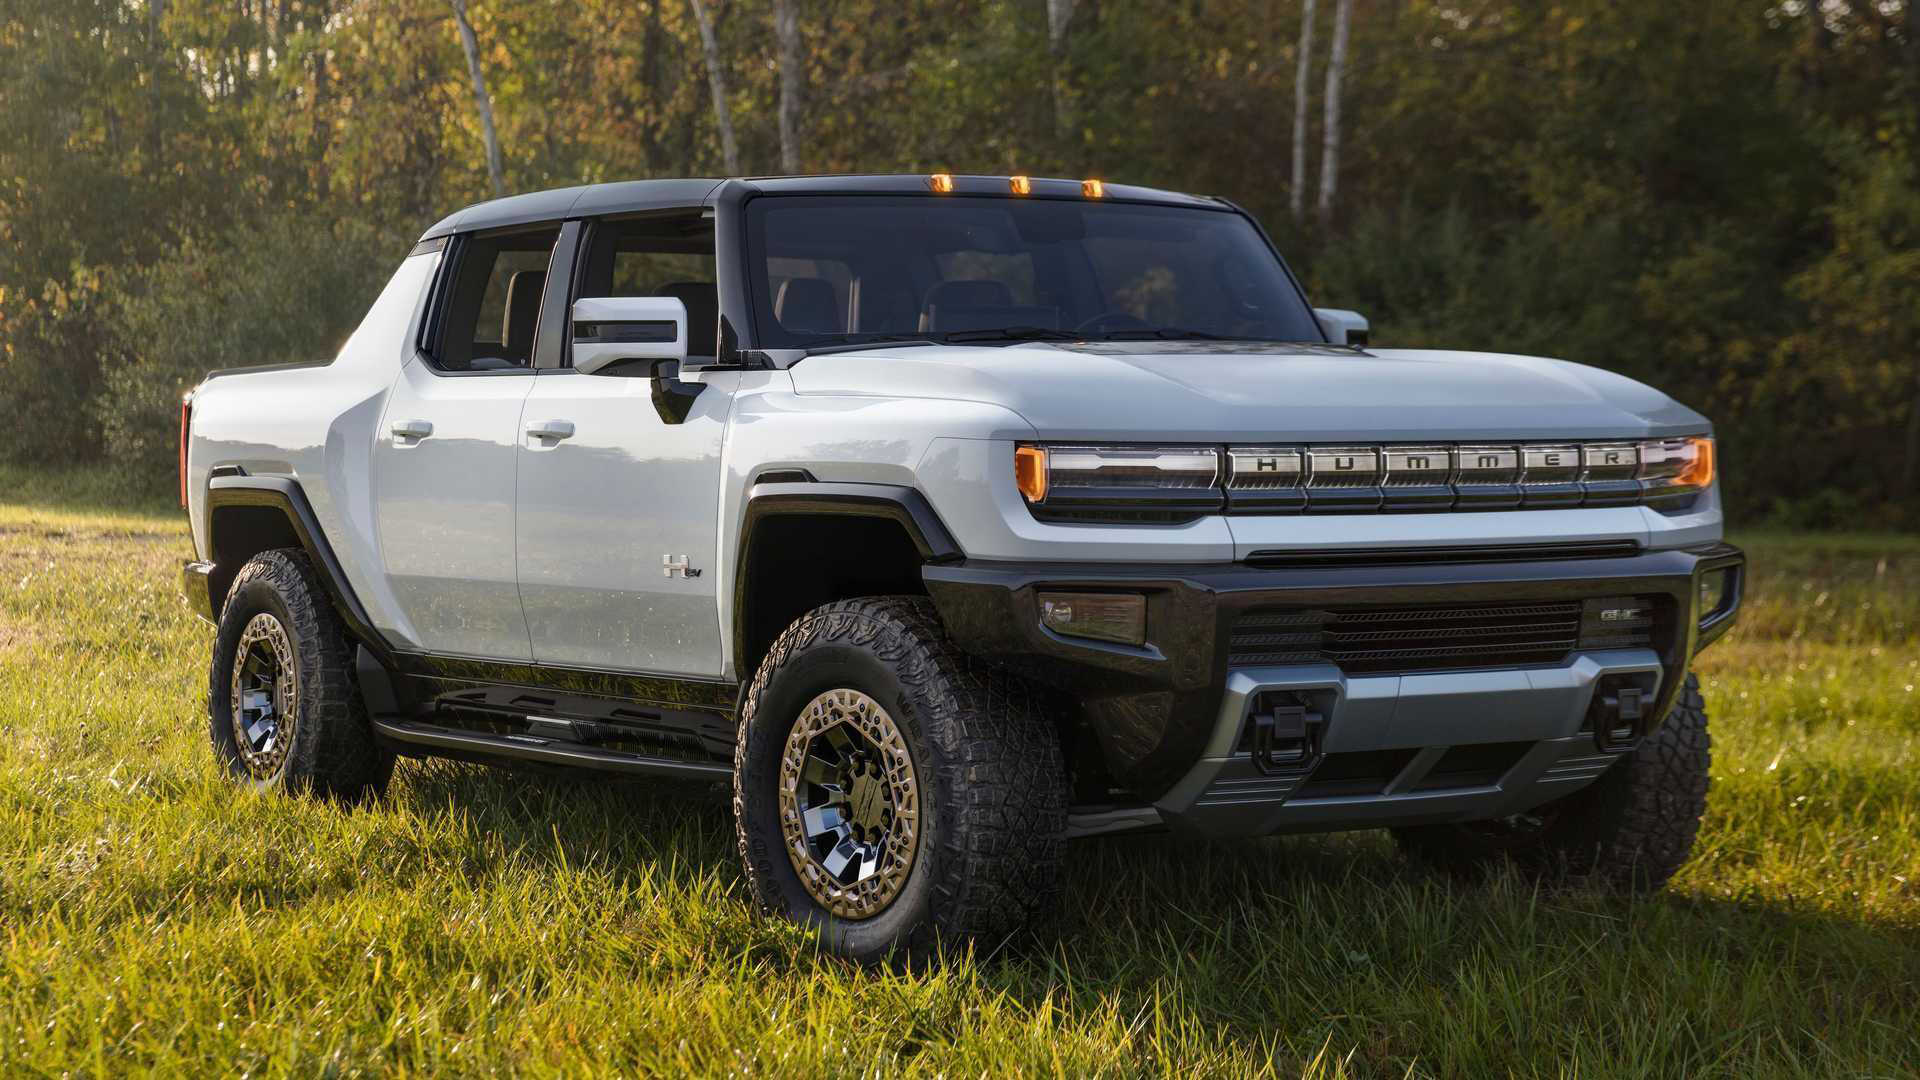 FastestCharging Electric Cars GMC Hummer EV, Lucid Air, And More